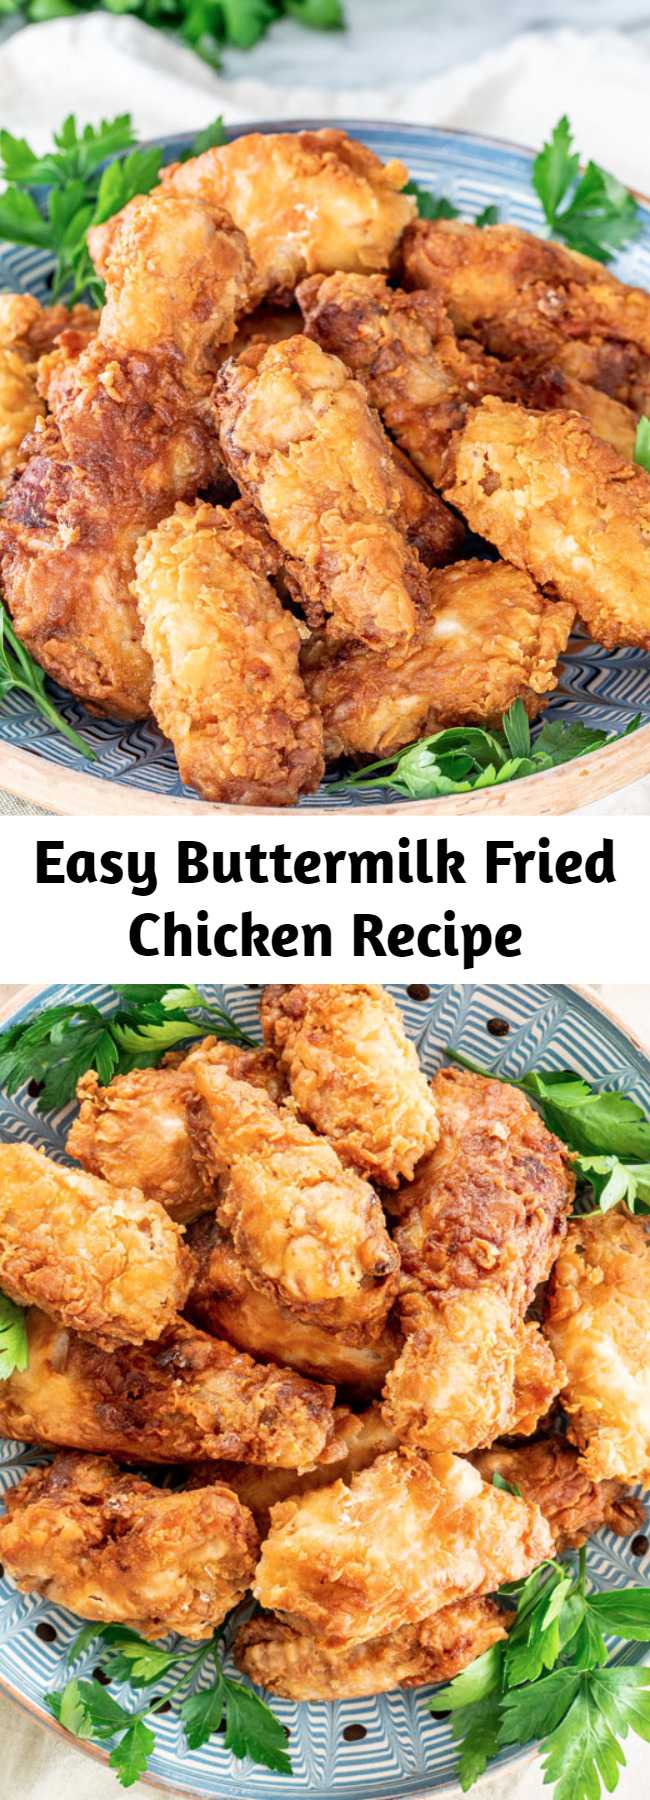 Easy Buttermilk Fried Chicken Recipe - This is the BEST EVER Buttermilk Fried Chicken! Super juicy and tender on the inside yet crispy on the outside and bursting with flavor! Perfect for lunch or dinner and served with a side salad.